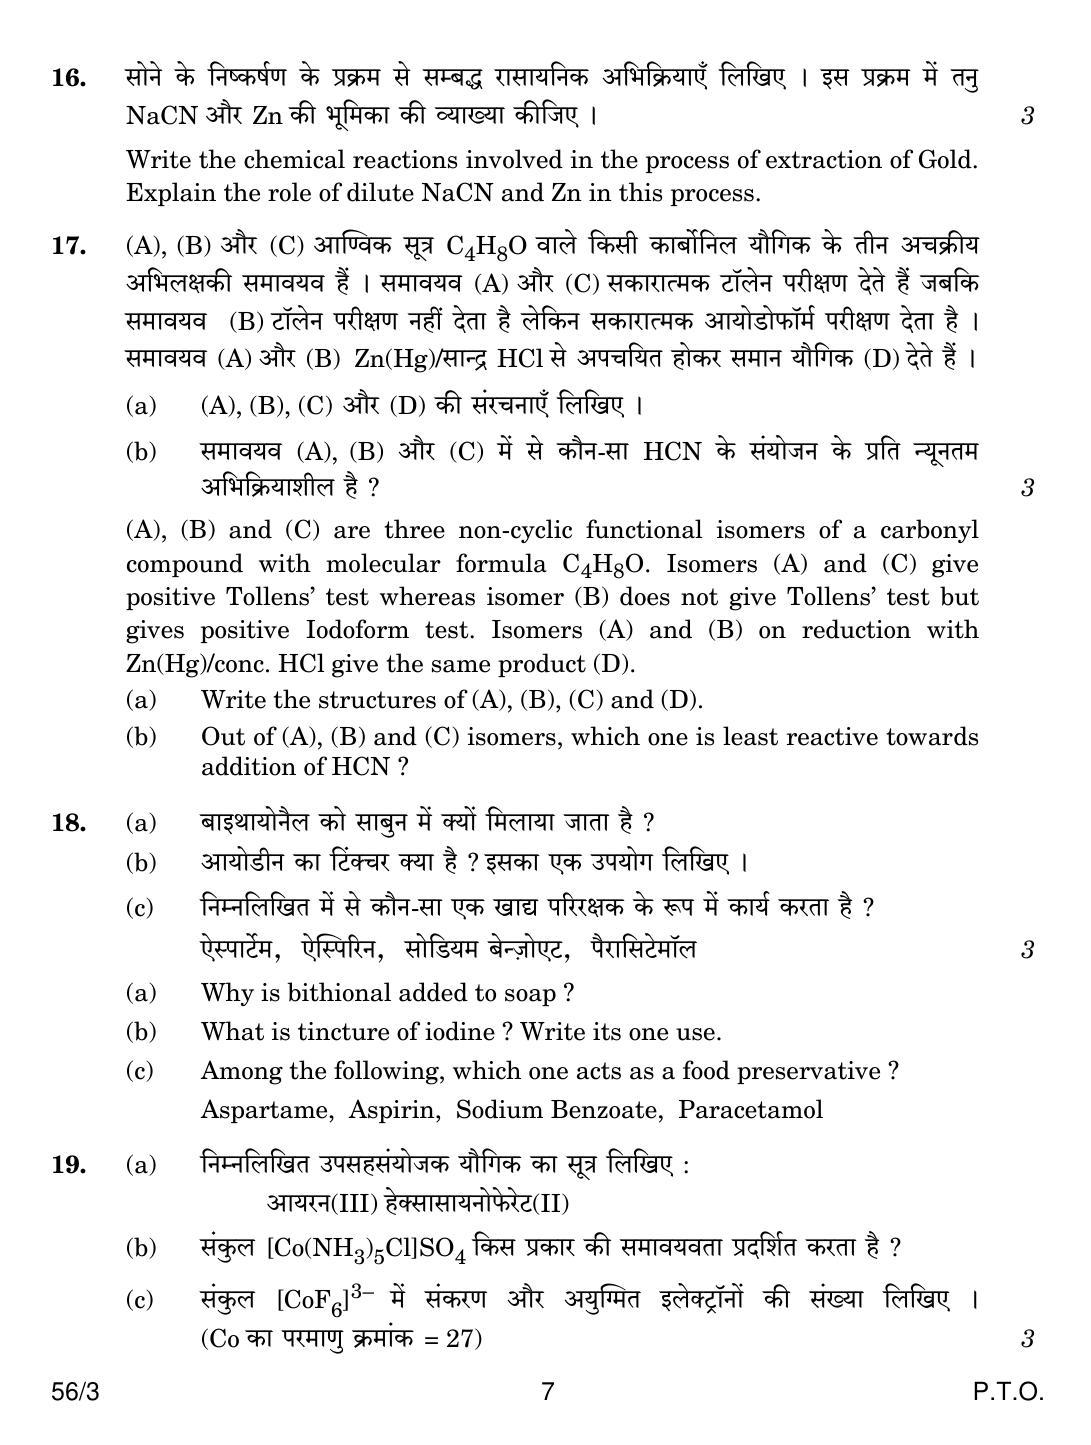 CBSE Class 12 56-3 CHEMISTRY 2018 Question Paper - Page 7